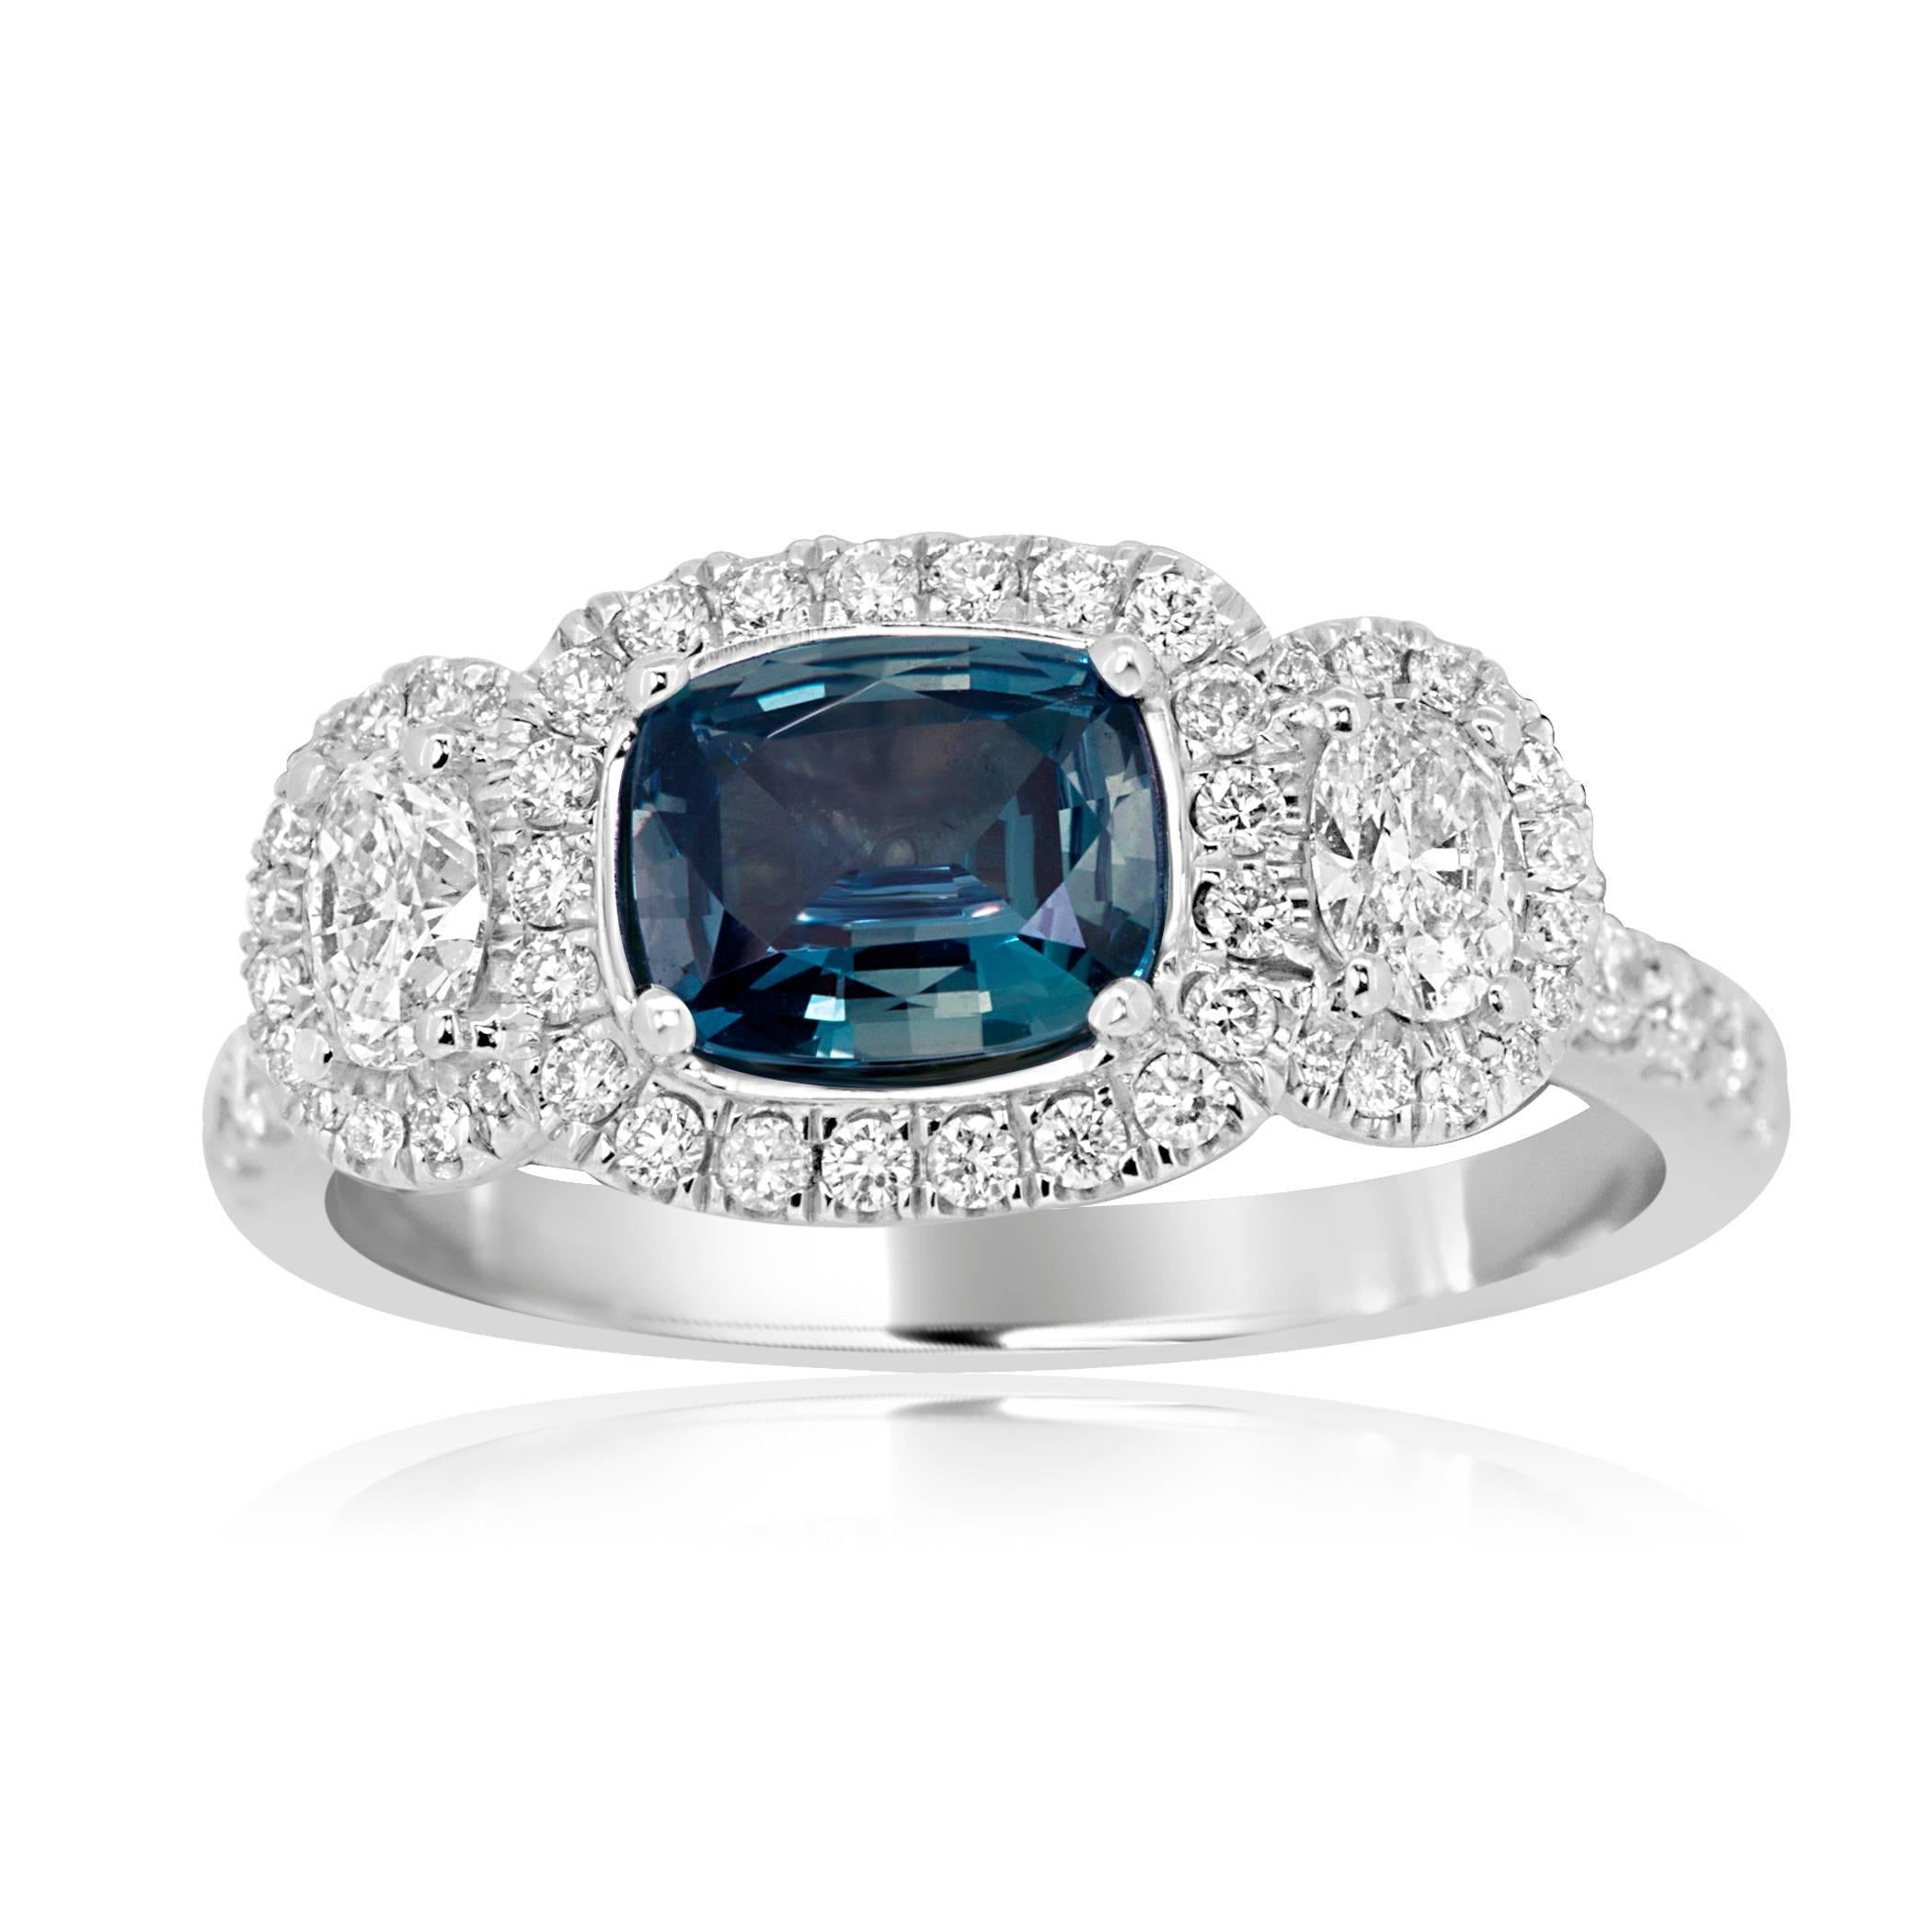 GIA Certified 0.90 Carat Alexandrite cushion Very Good Color Change encircled in Halo of White Diamond 0.50 Carat Flanked by 2 White diamond Ovals 0.35 Carat In 18K White Gold Ring. 

MADE IN USA.
Total Stone Weight 1.75 Carat